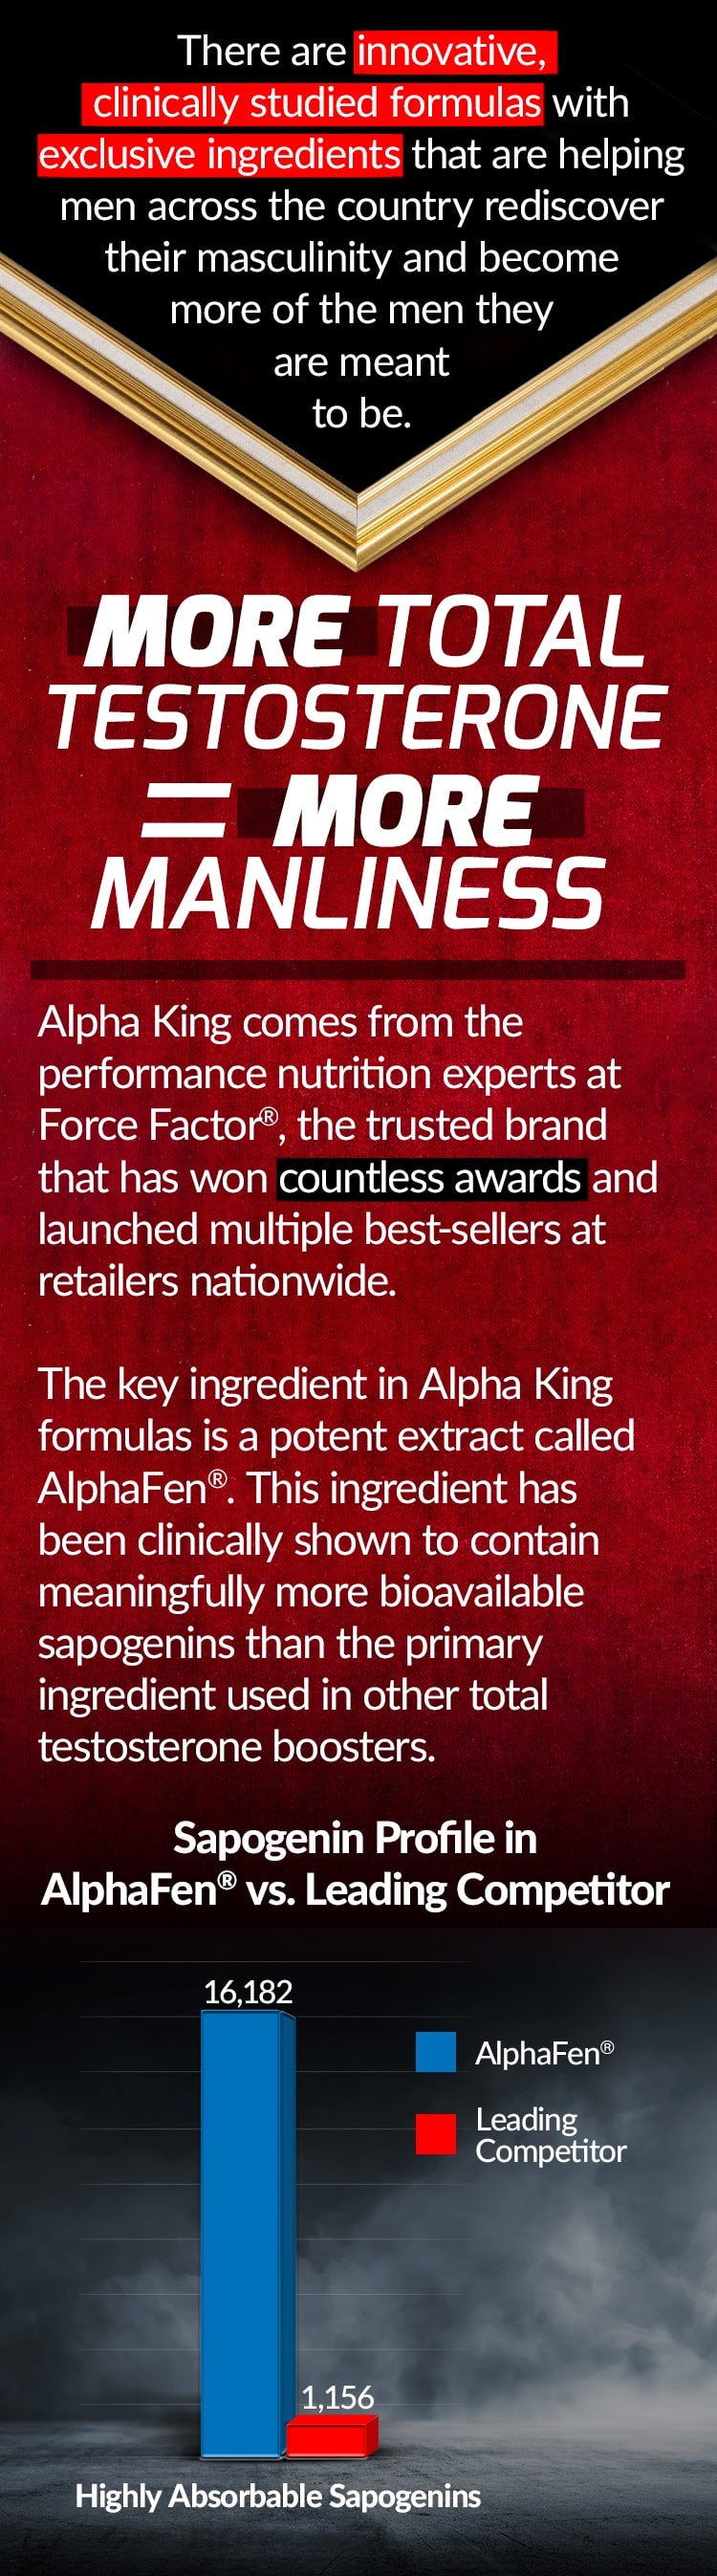 There are innovative, clinically studied formulas with exclusive ingredients that are helping men across the country rediscover their masculinity and become more of the men they are meant to be. MORE TOTAL TESTOSTERONE FOR MORE MANLINESS. Alpha King comes from the performance nutrition experts at Force Factor®, the trusted brand that has won countless awards and launched multiple best-sellers at retailers nationwide. The key ingredient in Alpha King formulas is a potent extract called AlphaFen®. This ingredient has been clinically shown to contain meaningfully more bioavailable sapogenins than the primary ingredient used in other total testosterone boosters.